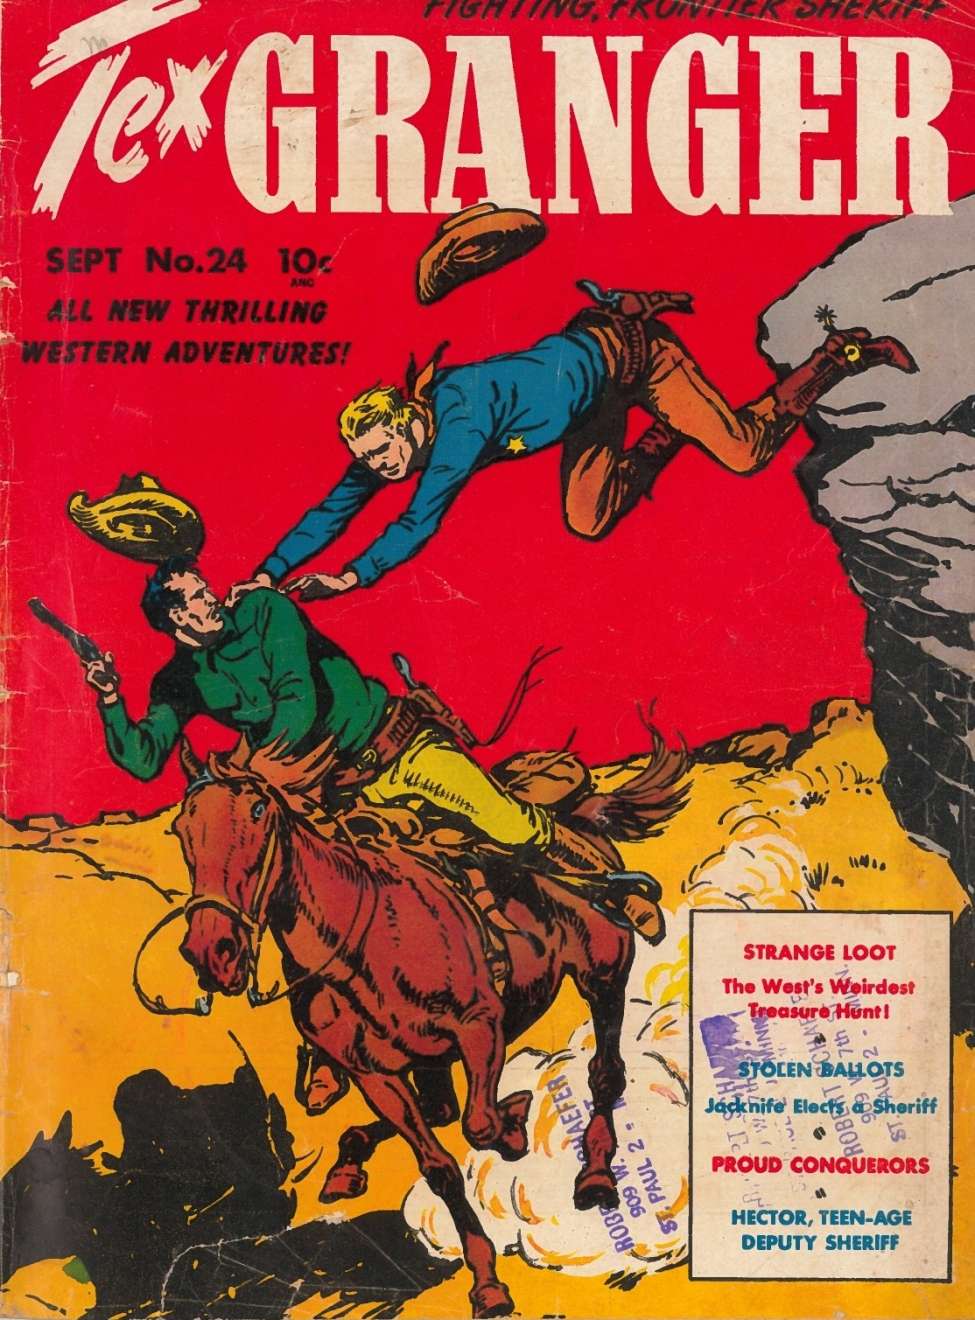 Book Cover For Tex Granger 24